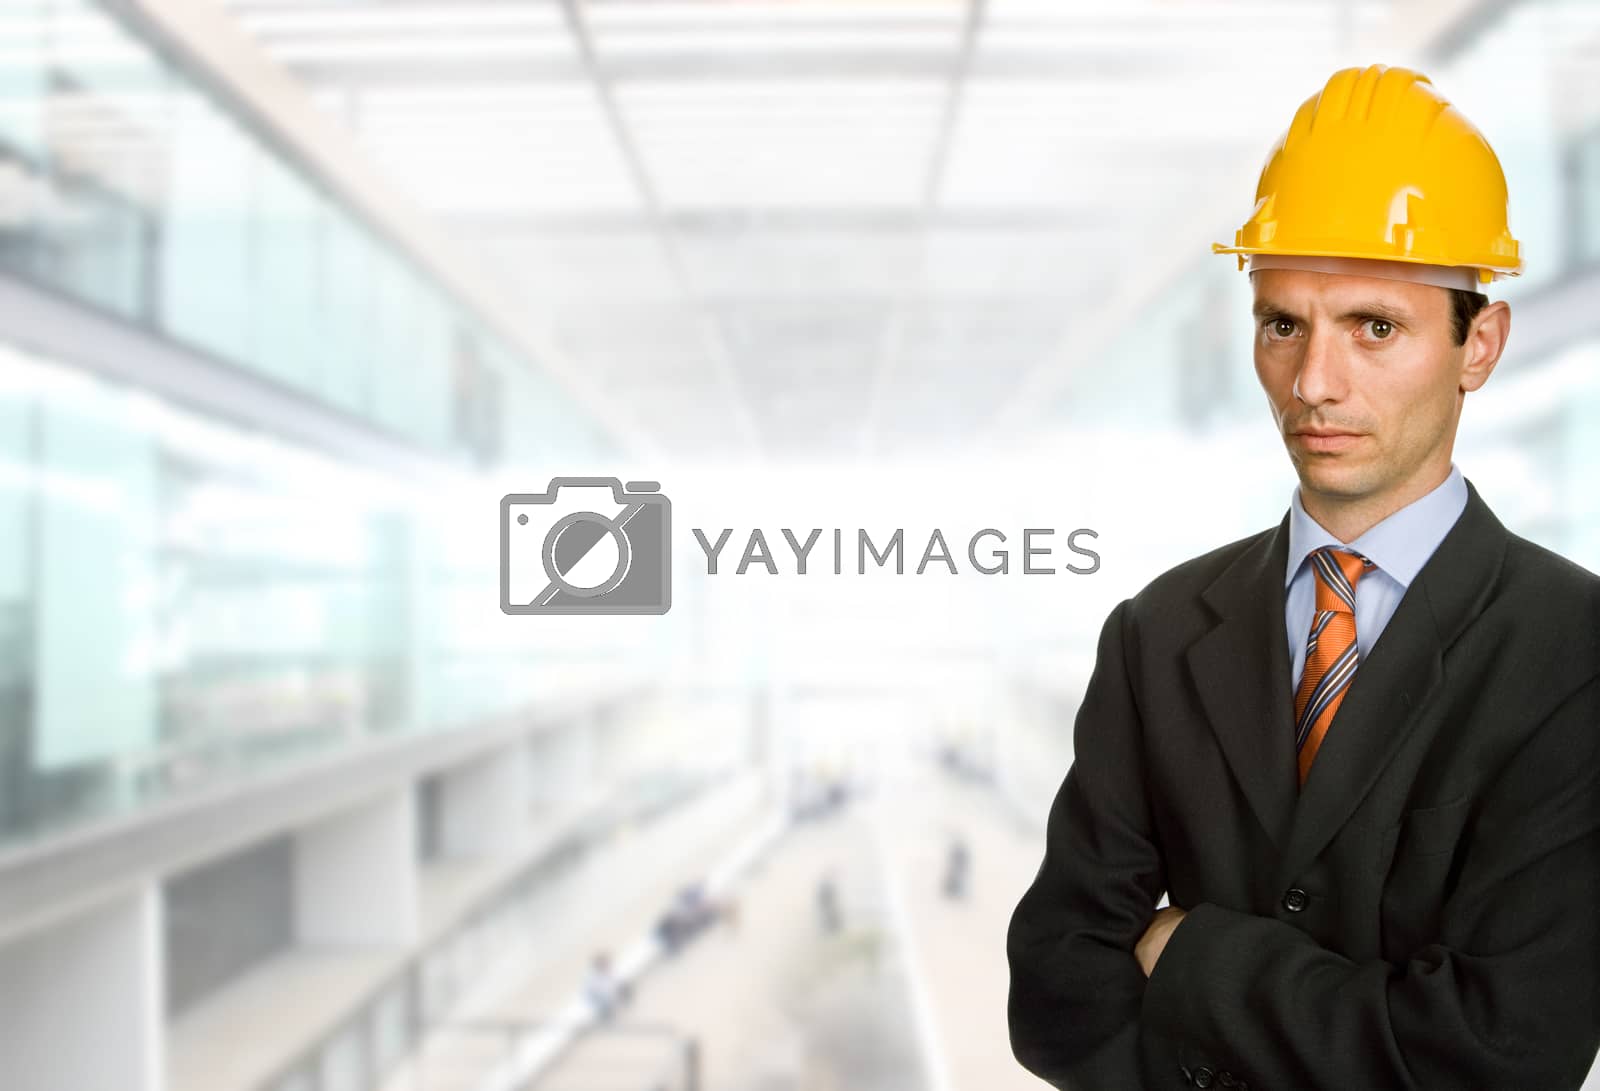 Royalty free image of engineer by zittto